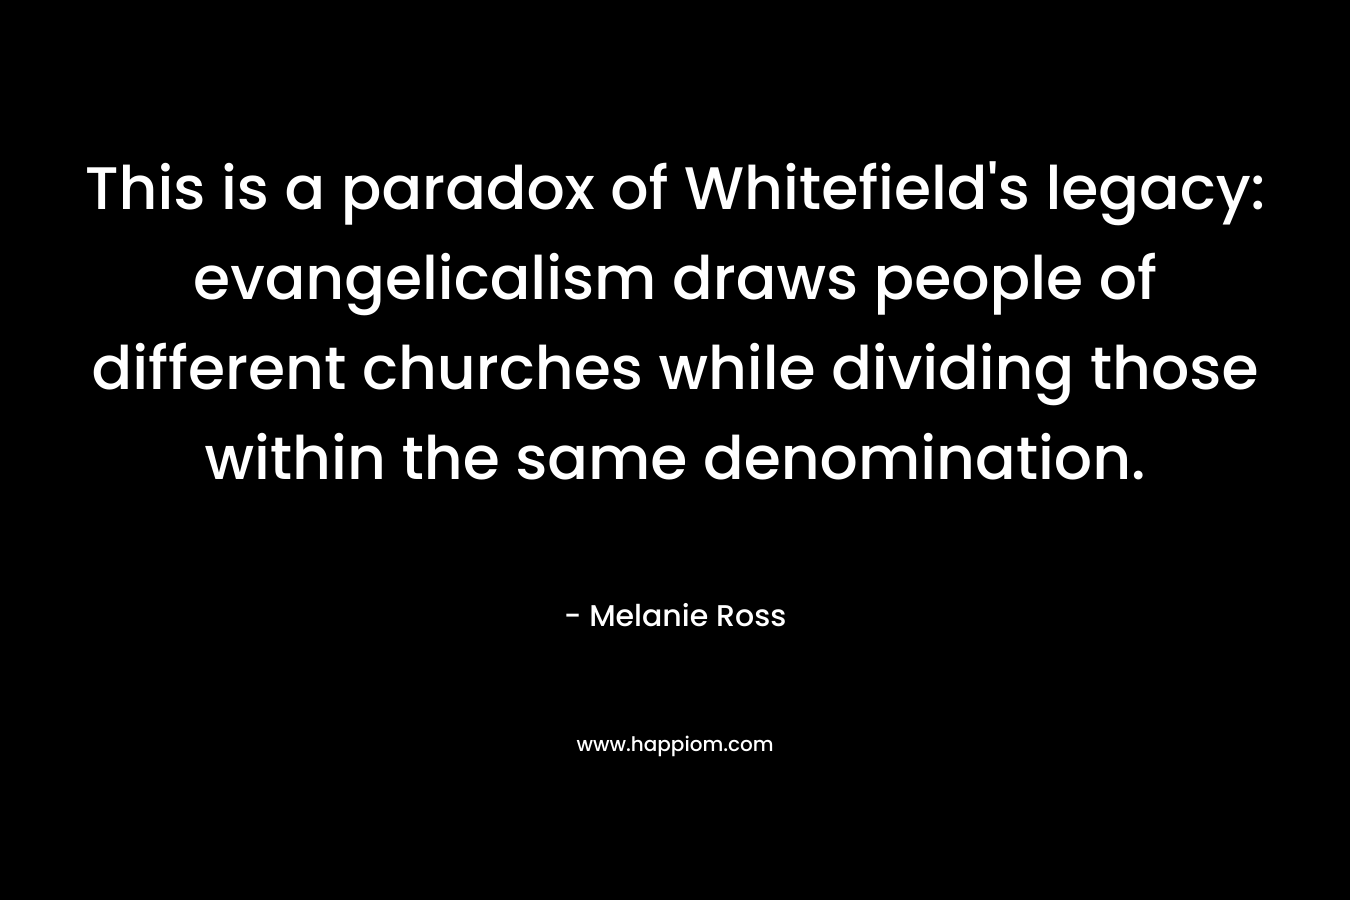 This is a paradox of Whitefield’s legacy: evangelicalism draws people of different churches while dividing those within the same denomination. – Melanie Ross